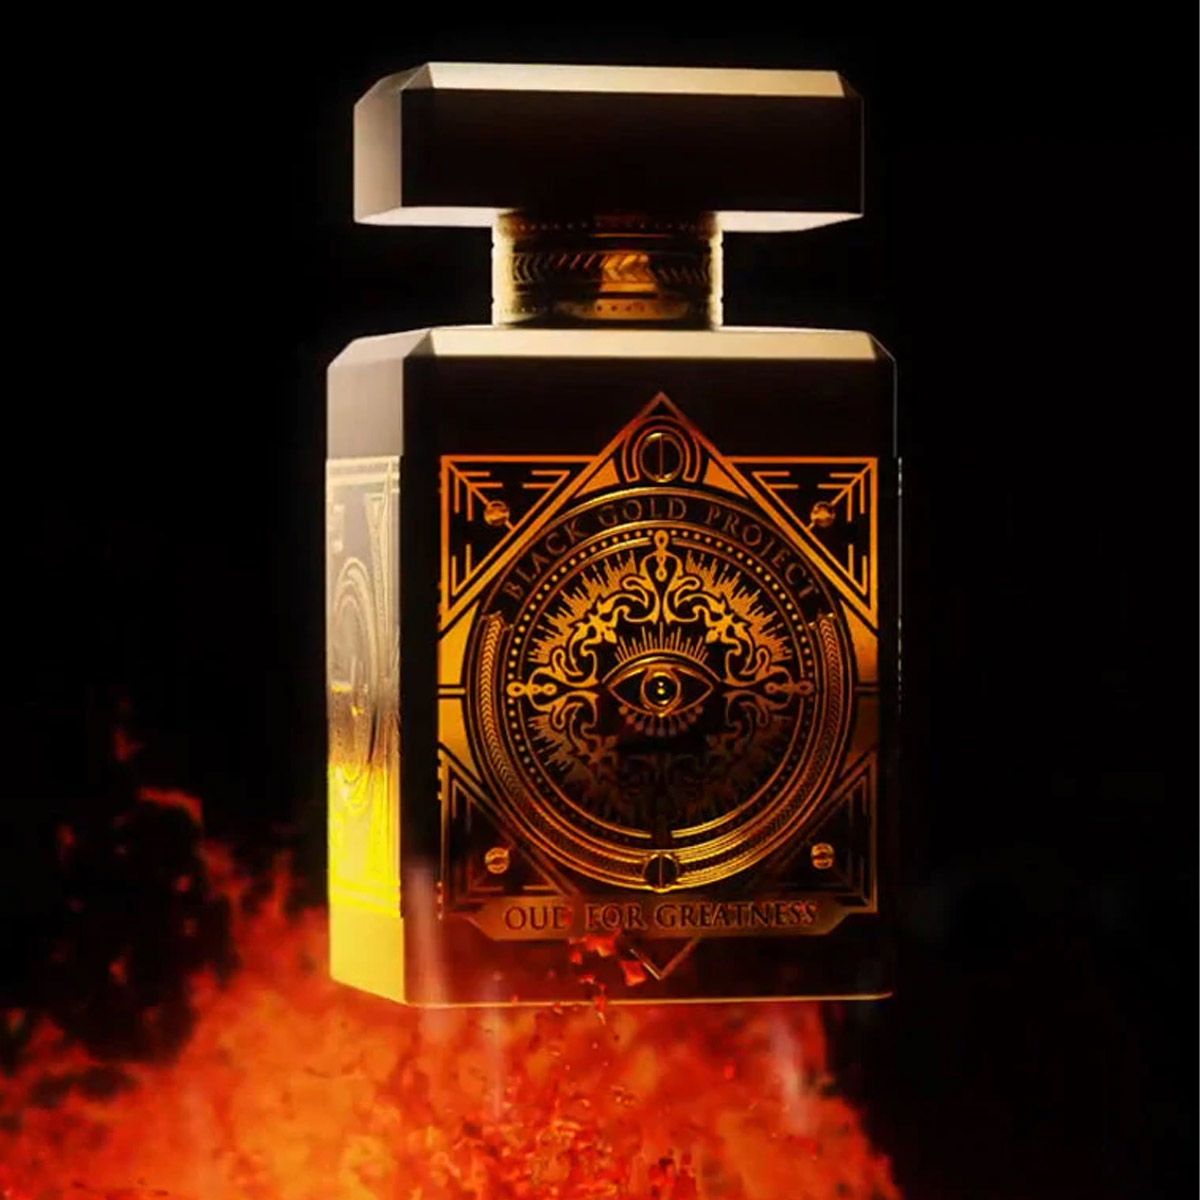  Initio Parfums Prives Oud for Greatness 